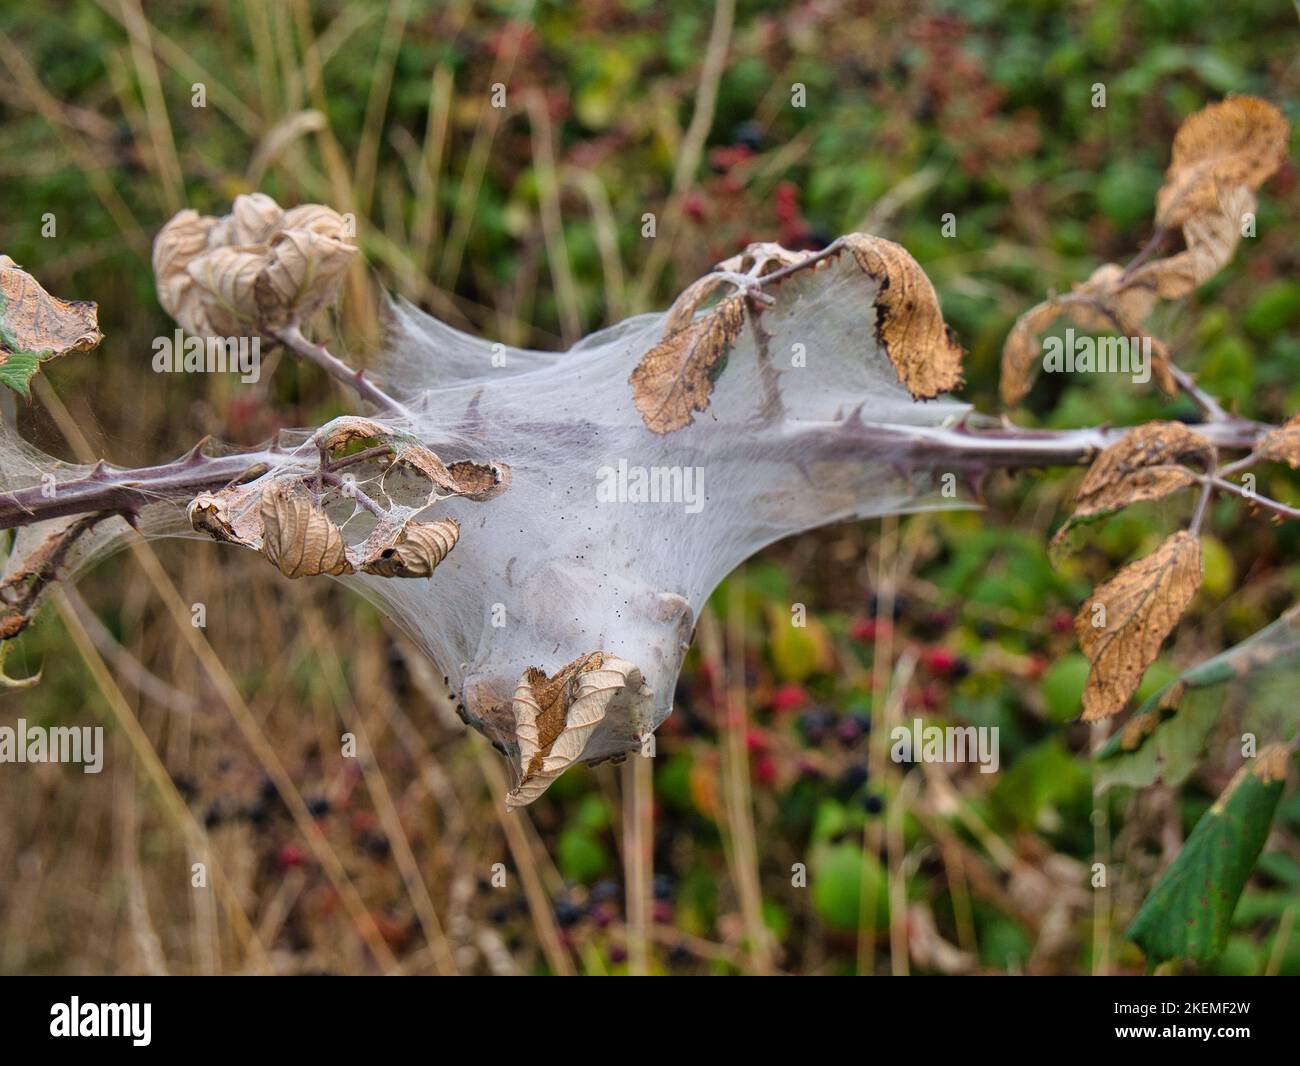 A caterpillar web constructed on a plant stem with dried leaves hedgerow in Suffolk, England, UK. Stock Photo